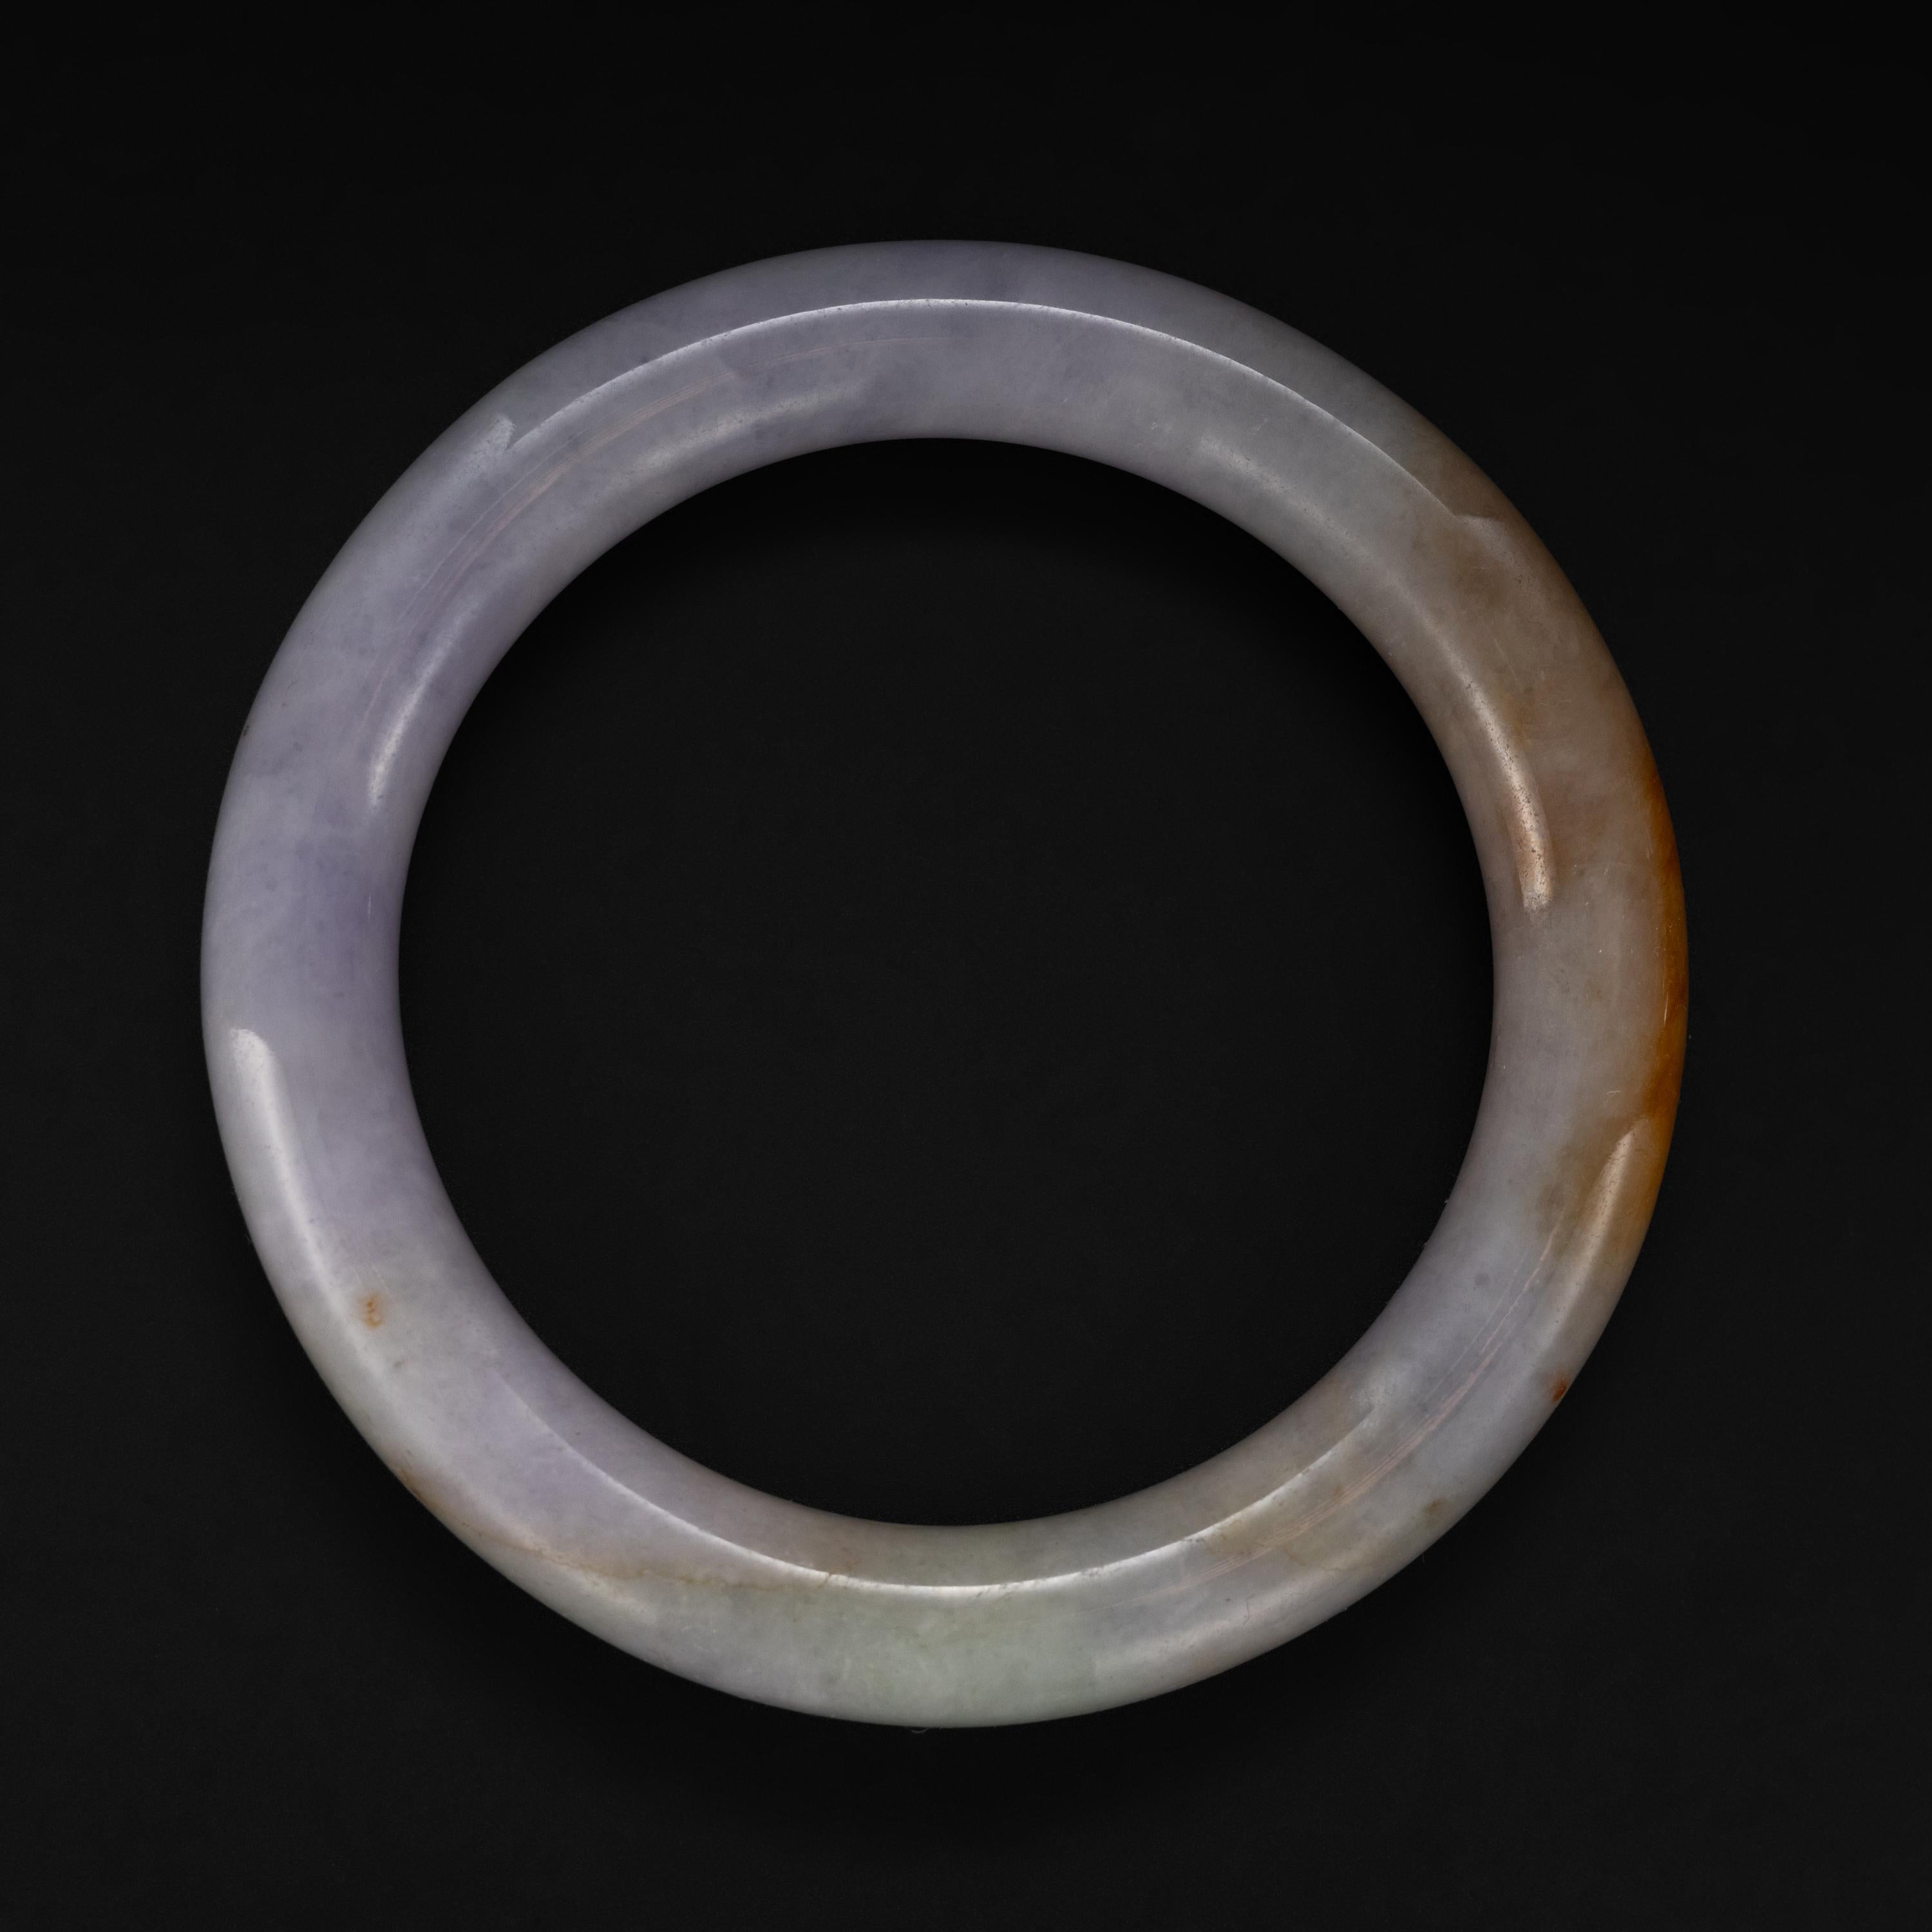 Describing the nuance of jade can be rather like trying to define music with words or explain the euphoric aroma of your baby's hair. Words can seem measly. But we have to try.

The color and emotional impact of this fine jade bangle made me think